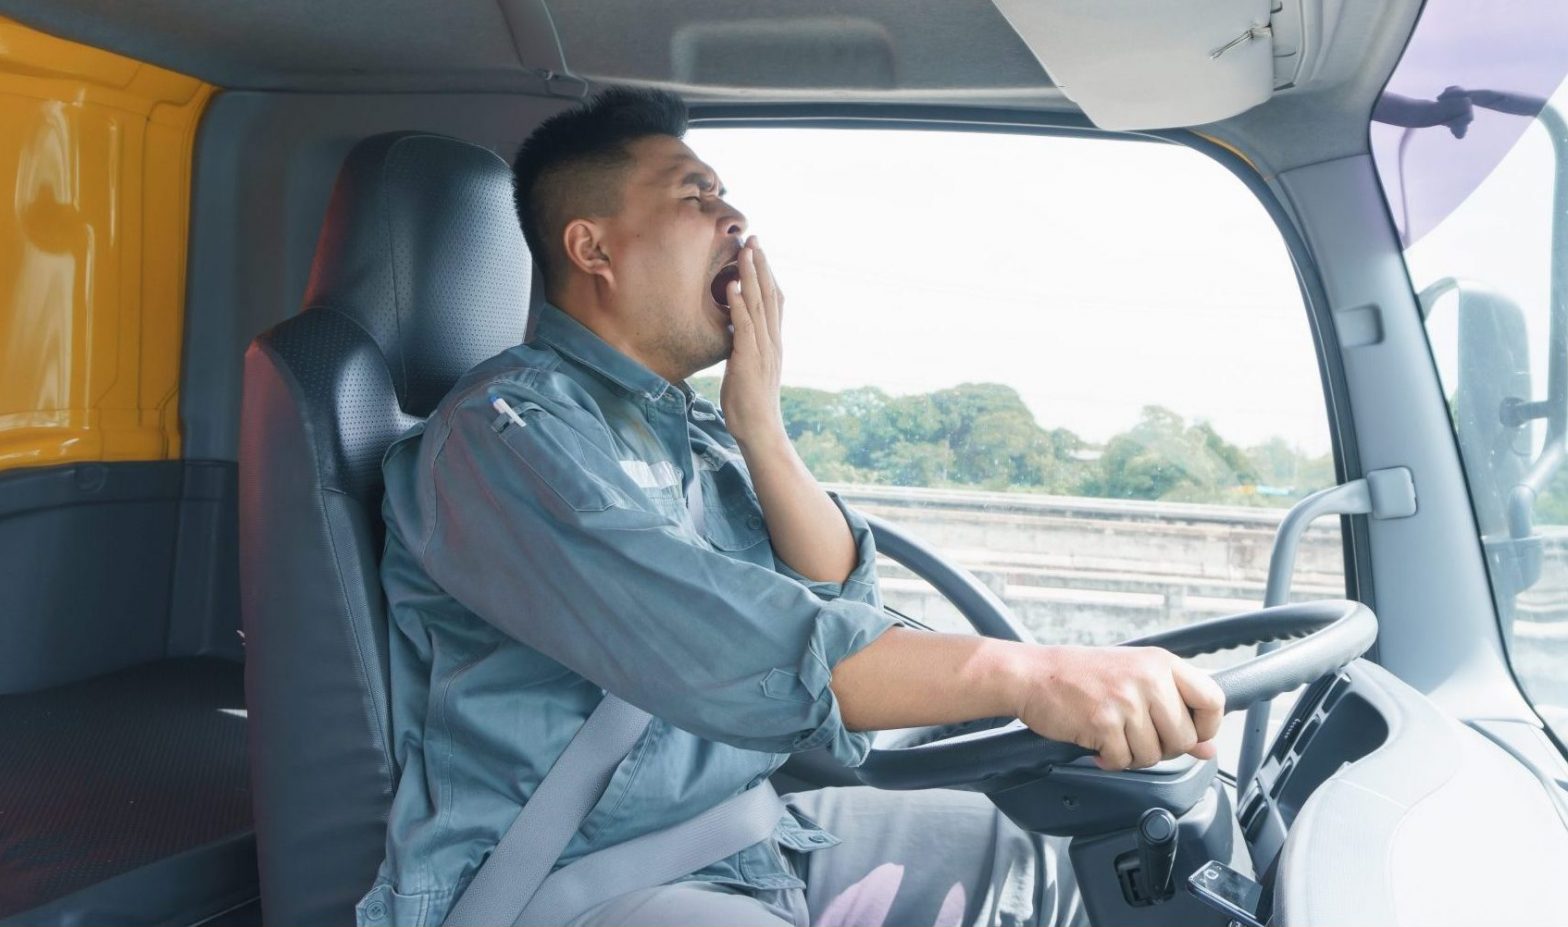 Truck driver yawning for fatigue when needing help from Truck Accident Injury Lawyer Norfolk.